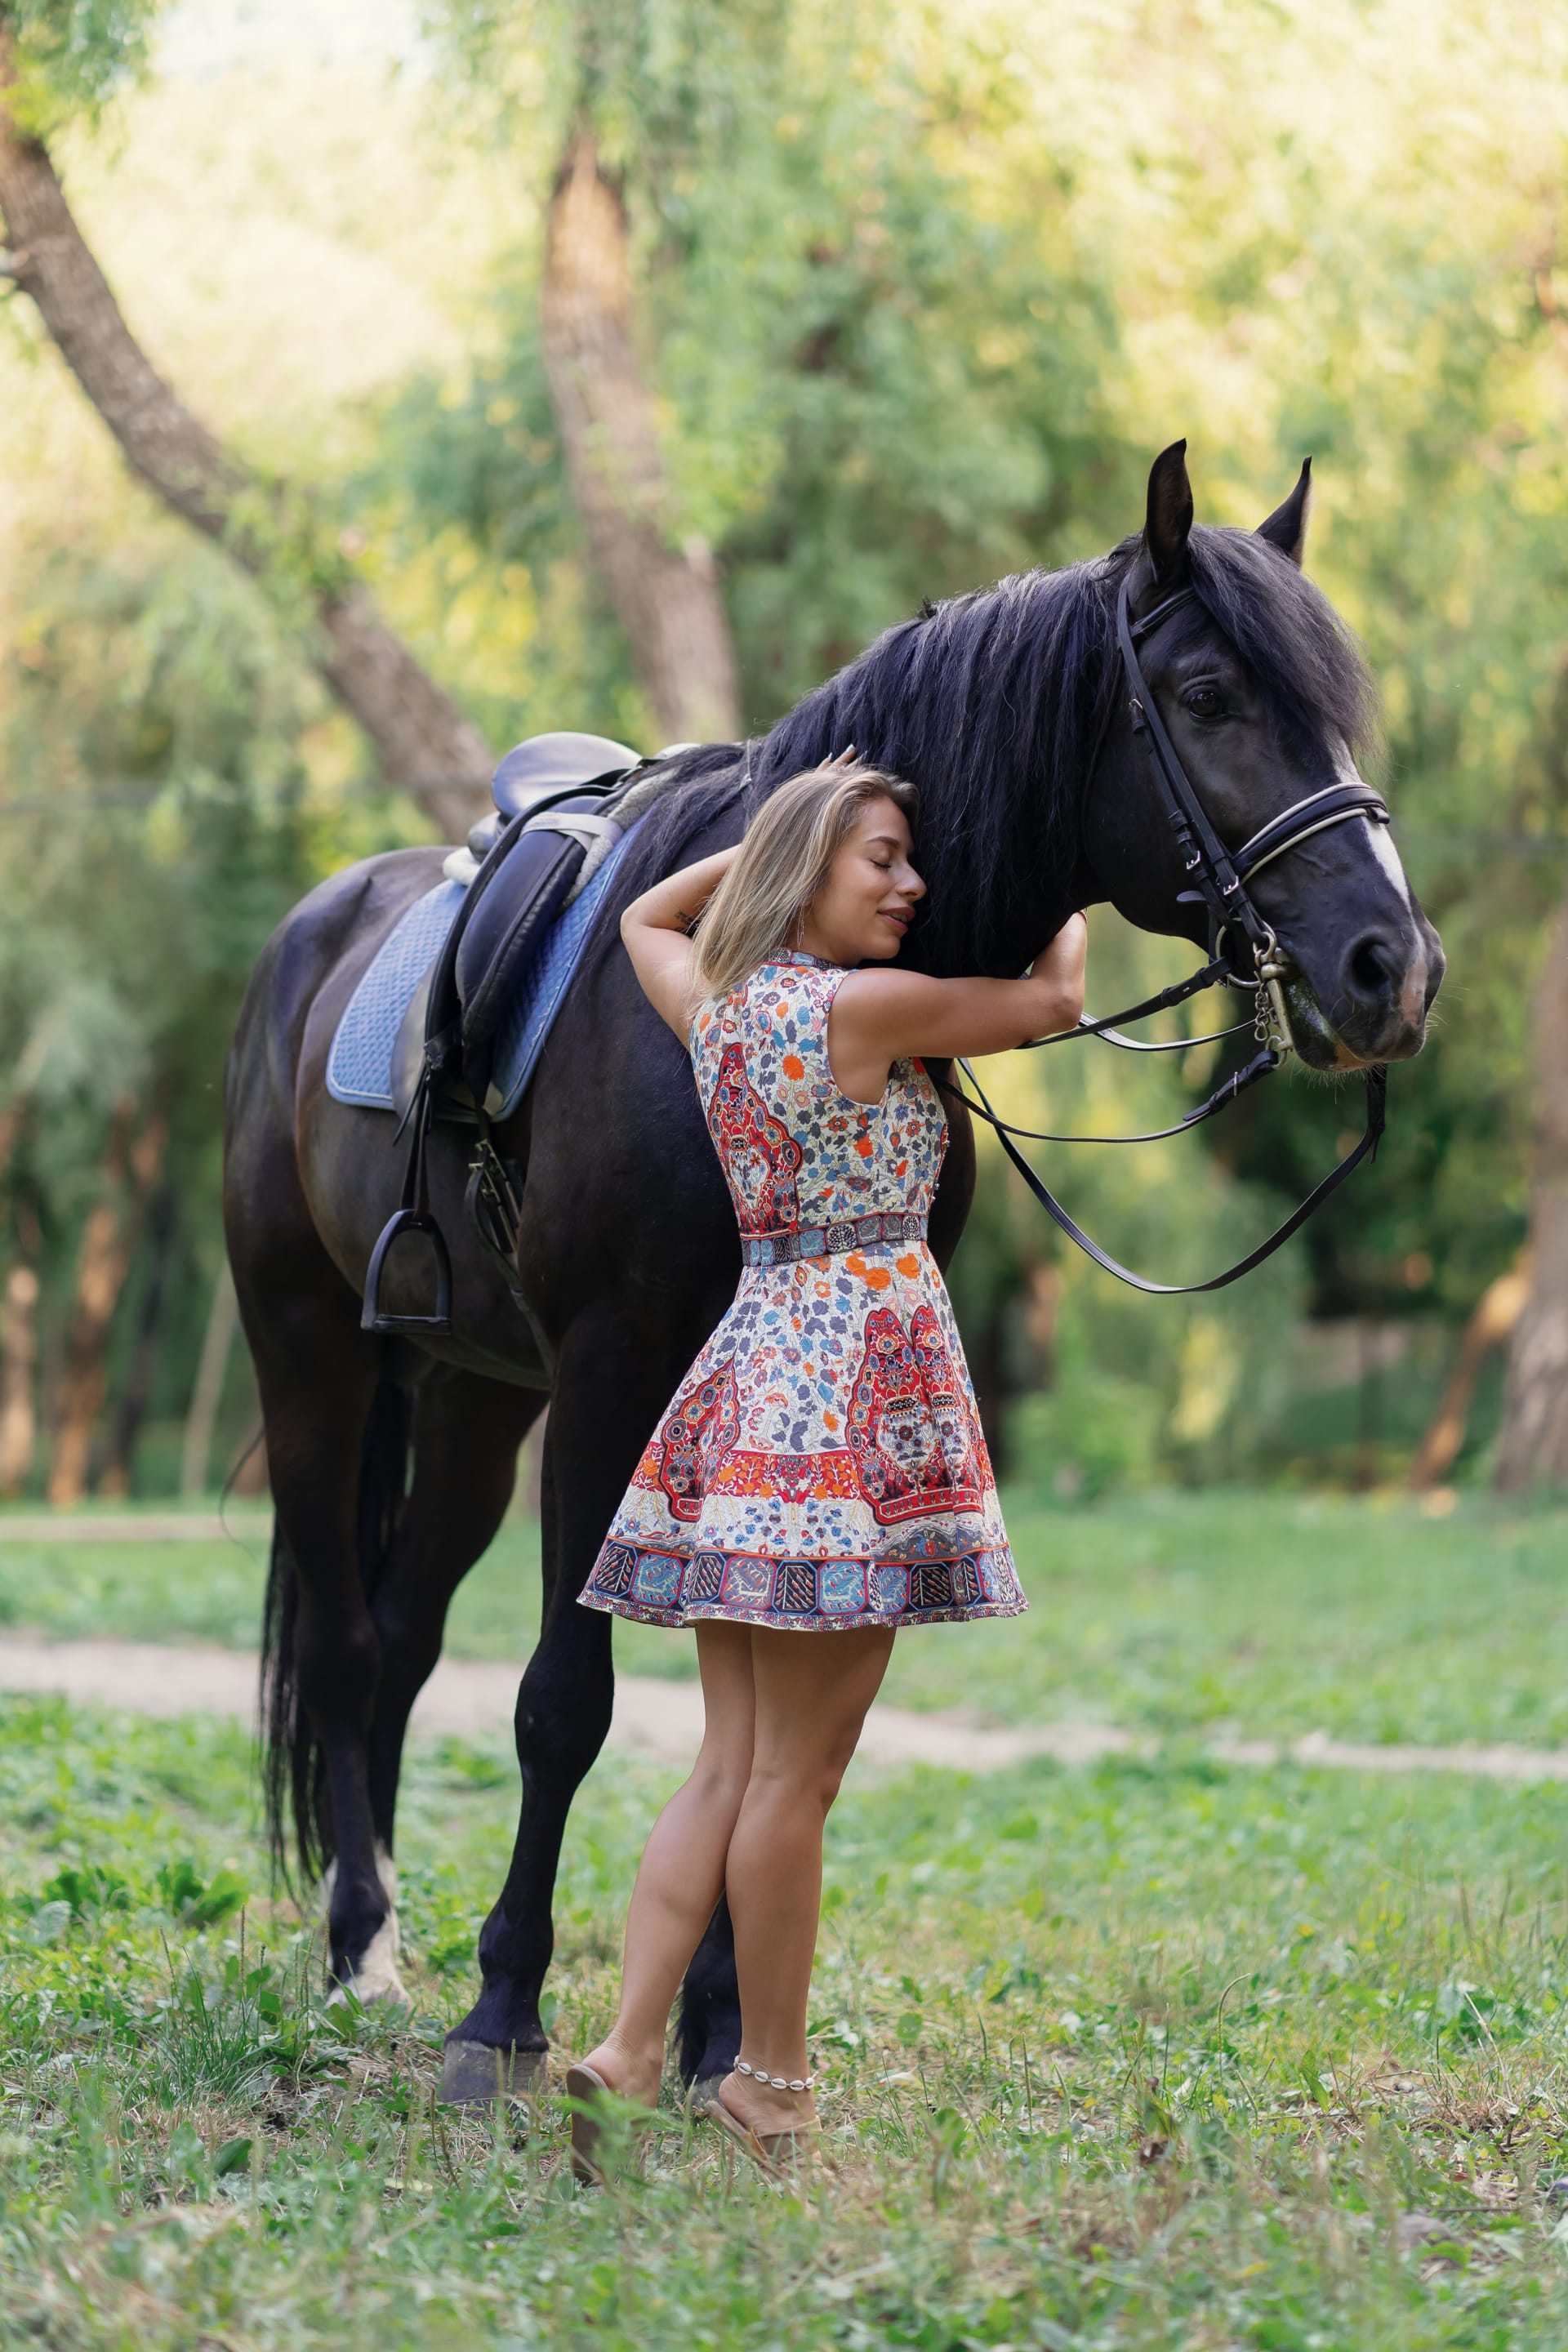 Young woman with horse image of horse